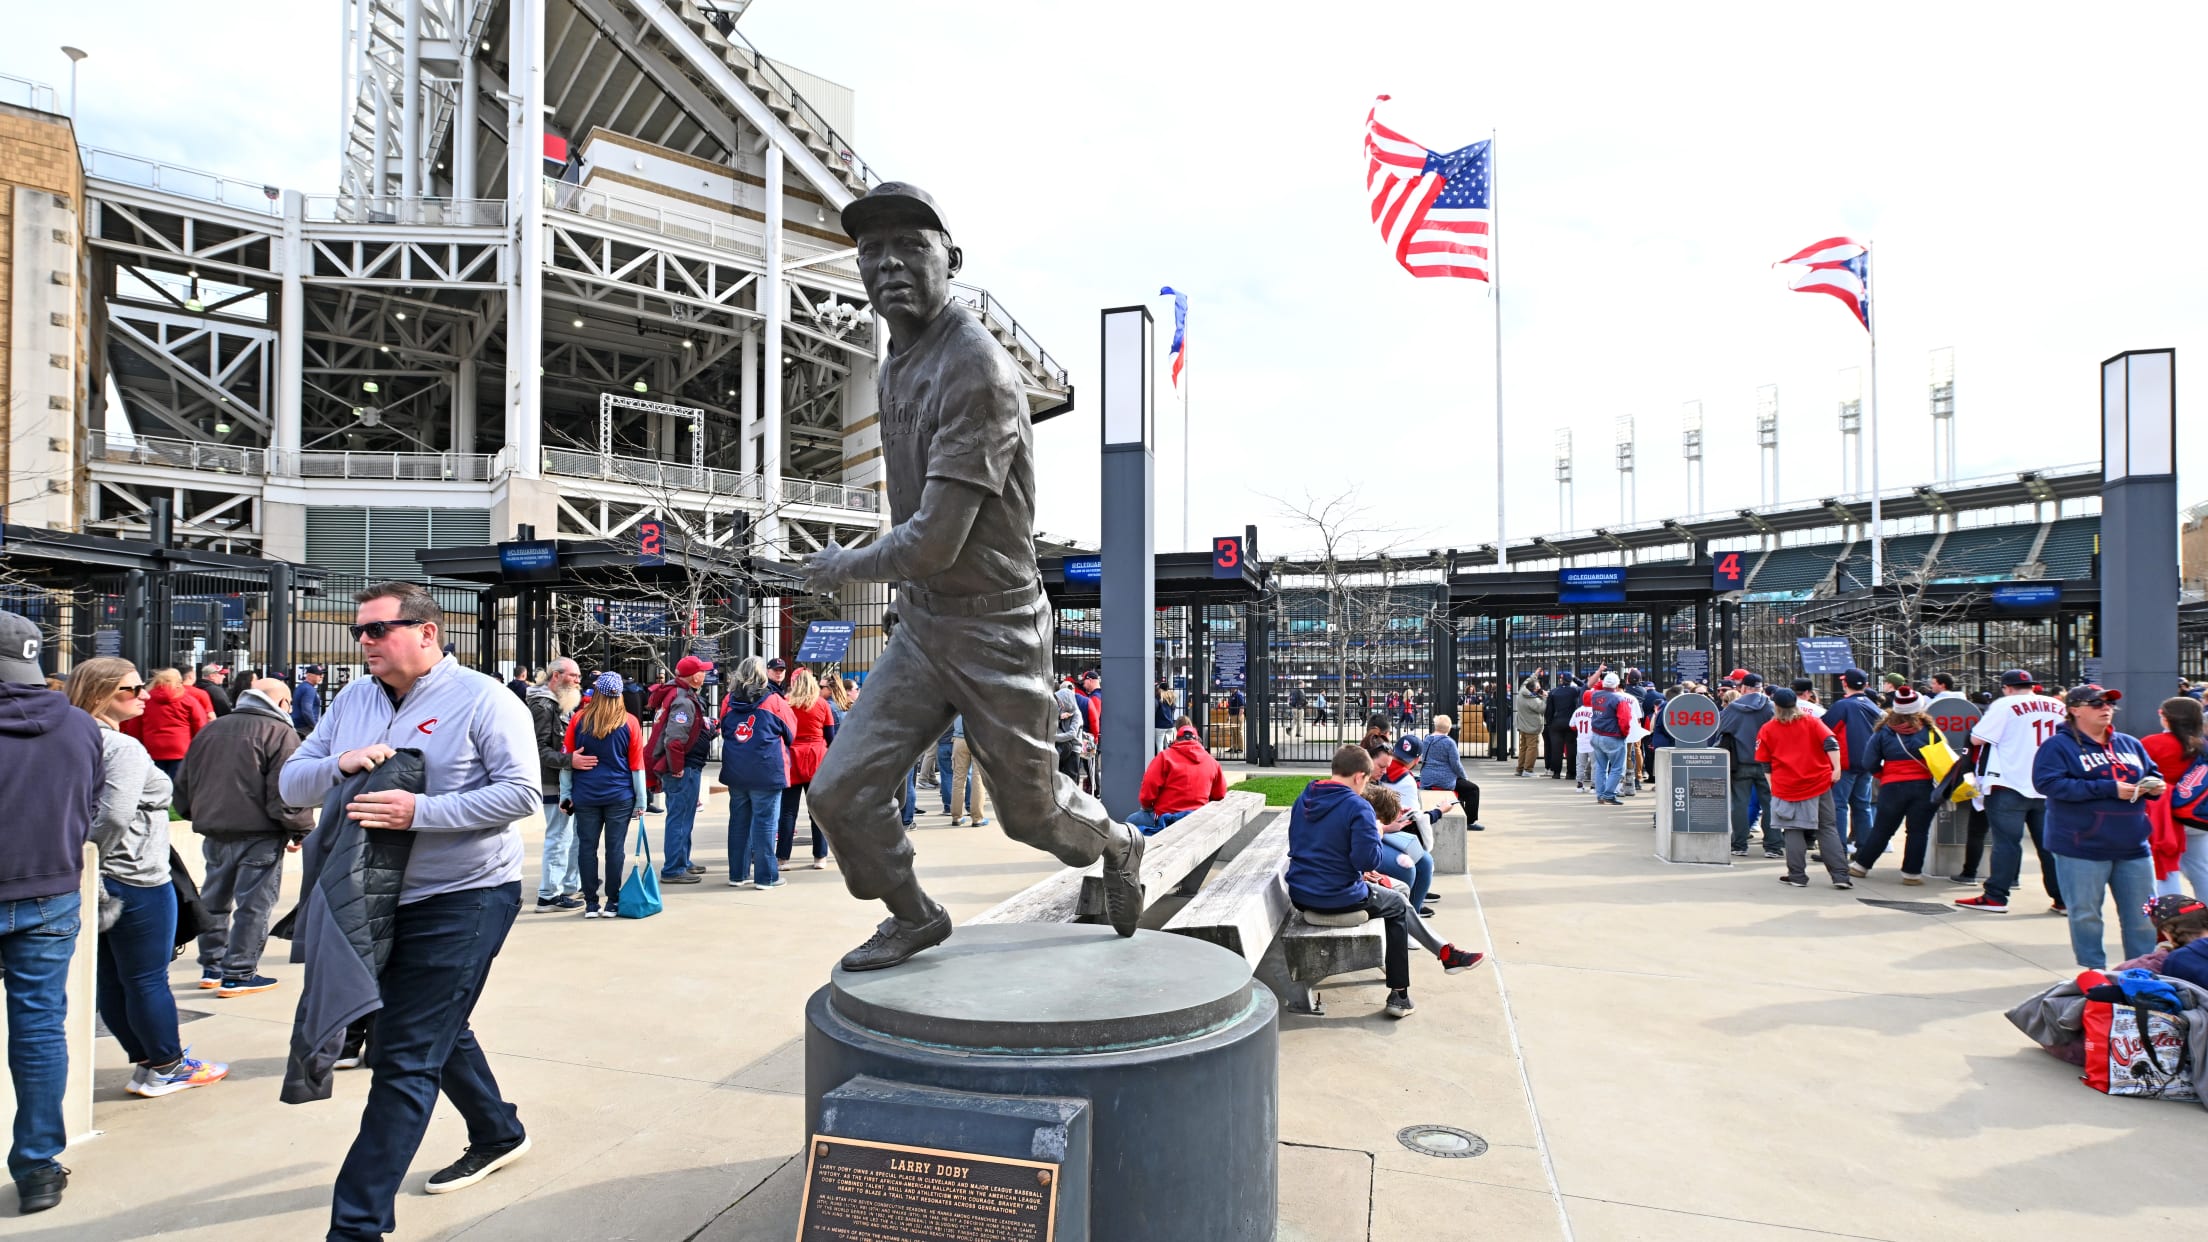 Baseball Legend Larry Doby Tapped for Congressional Gold Medal - Roll Call